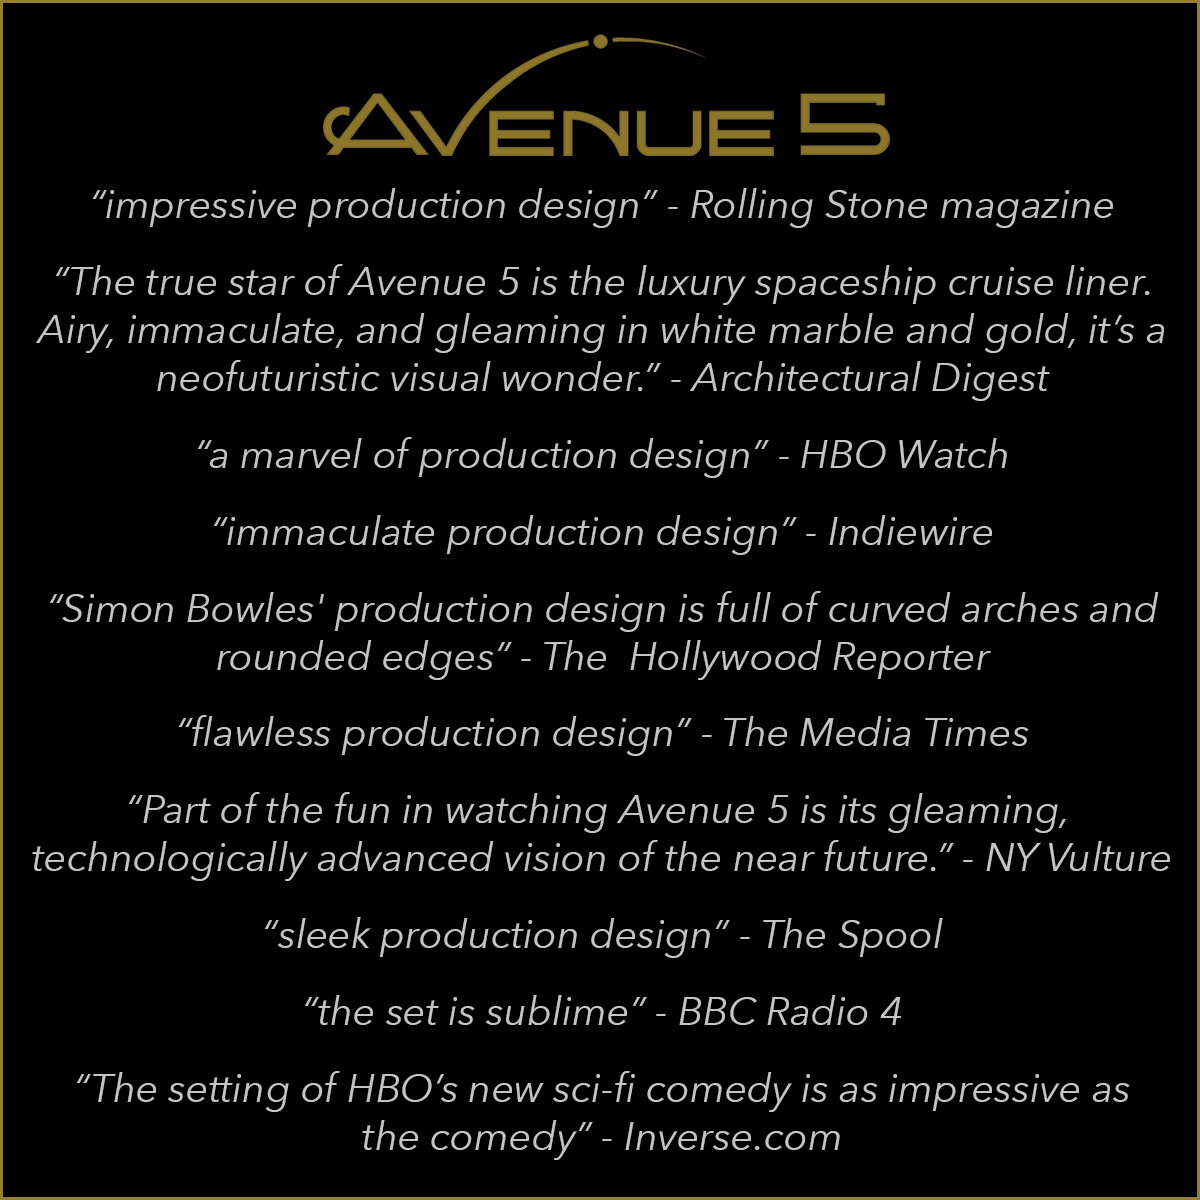 QUOTE FOR THE DESIGN OF AVENUE 5